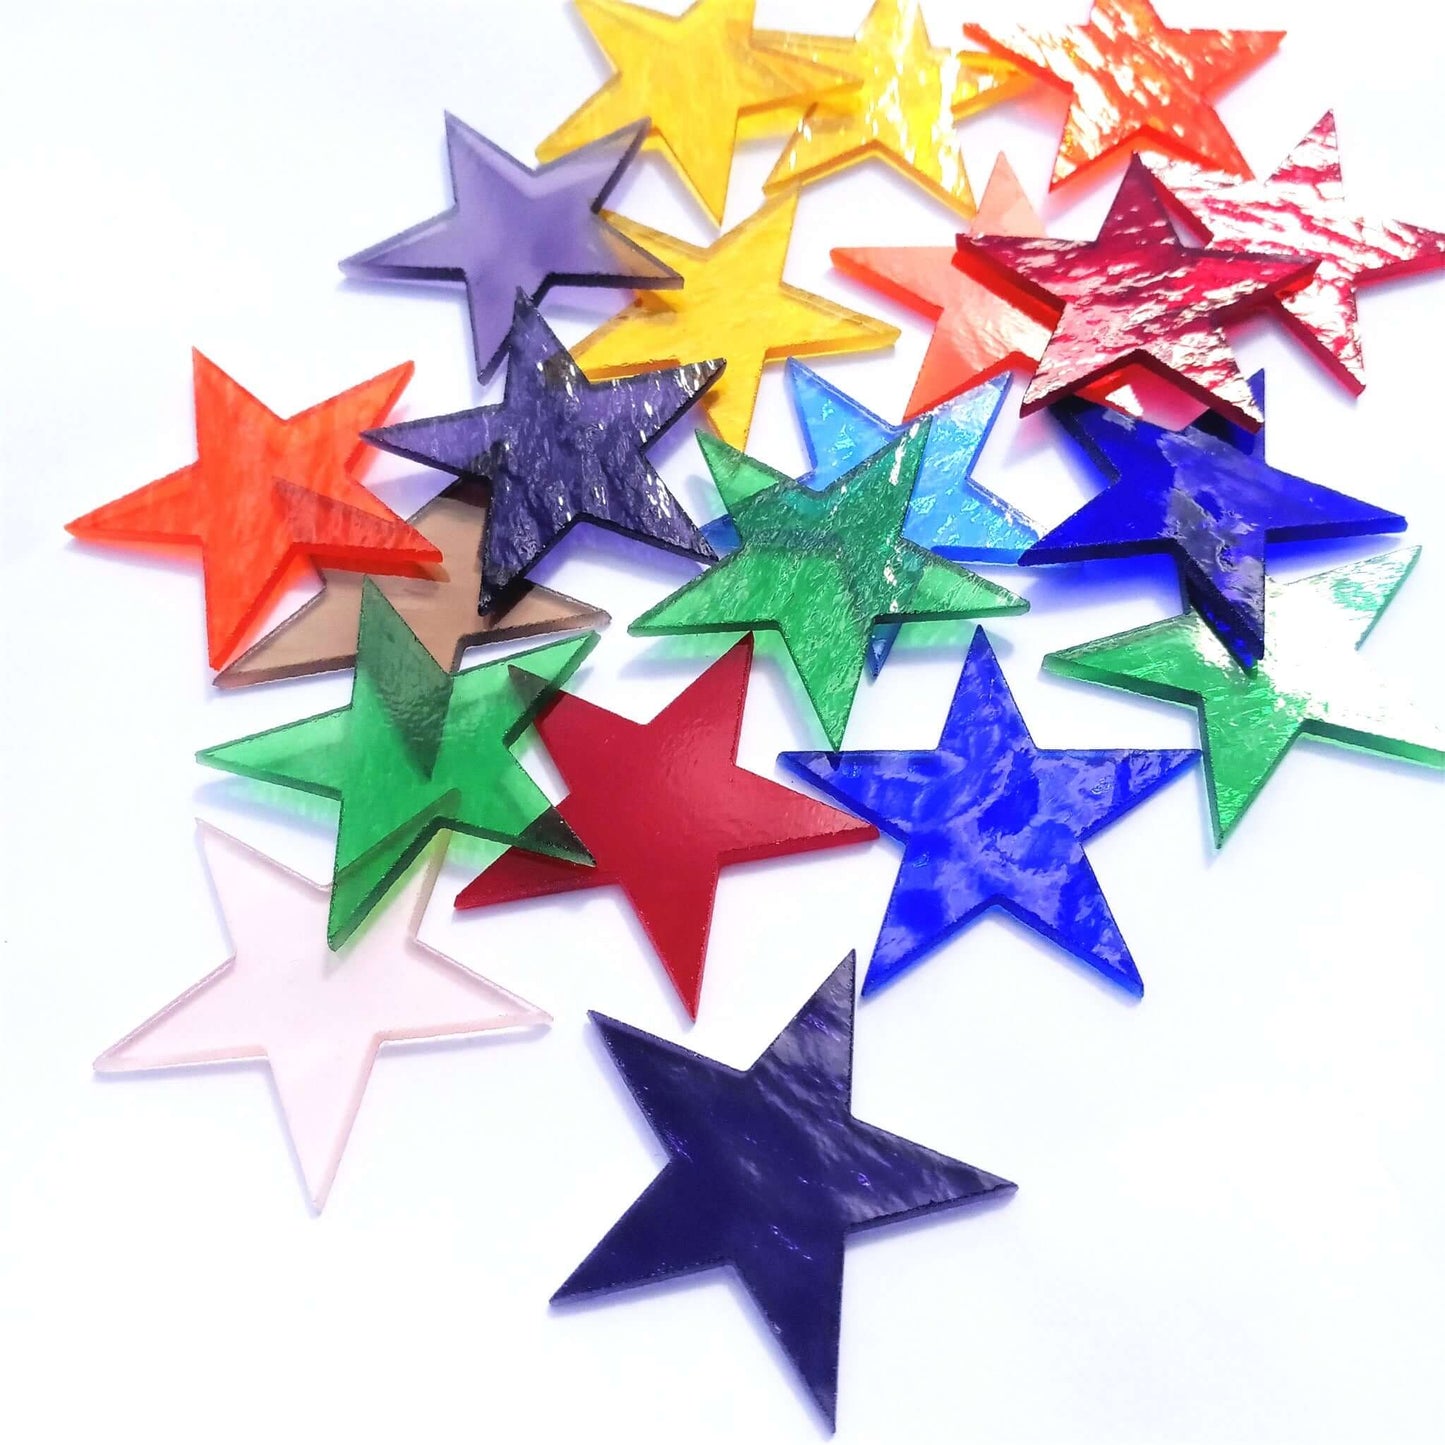 Precut Stained Glass 2.5" Stars, Assorted Colors, Package of 20